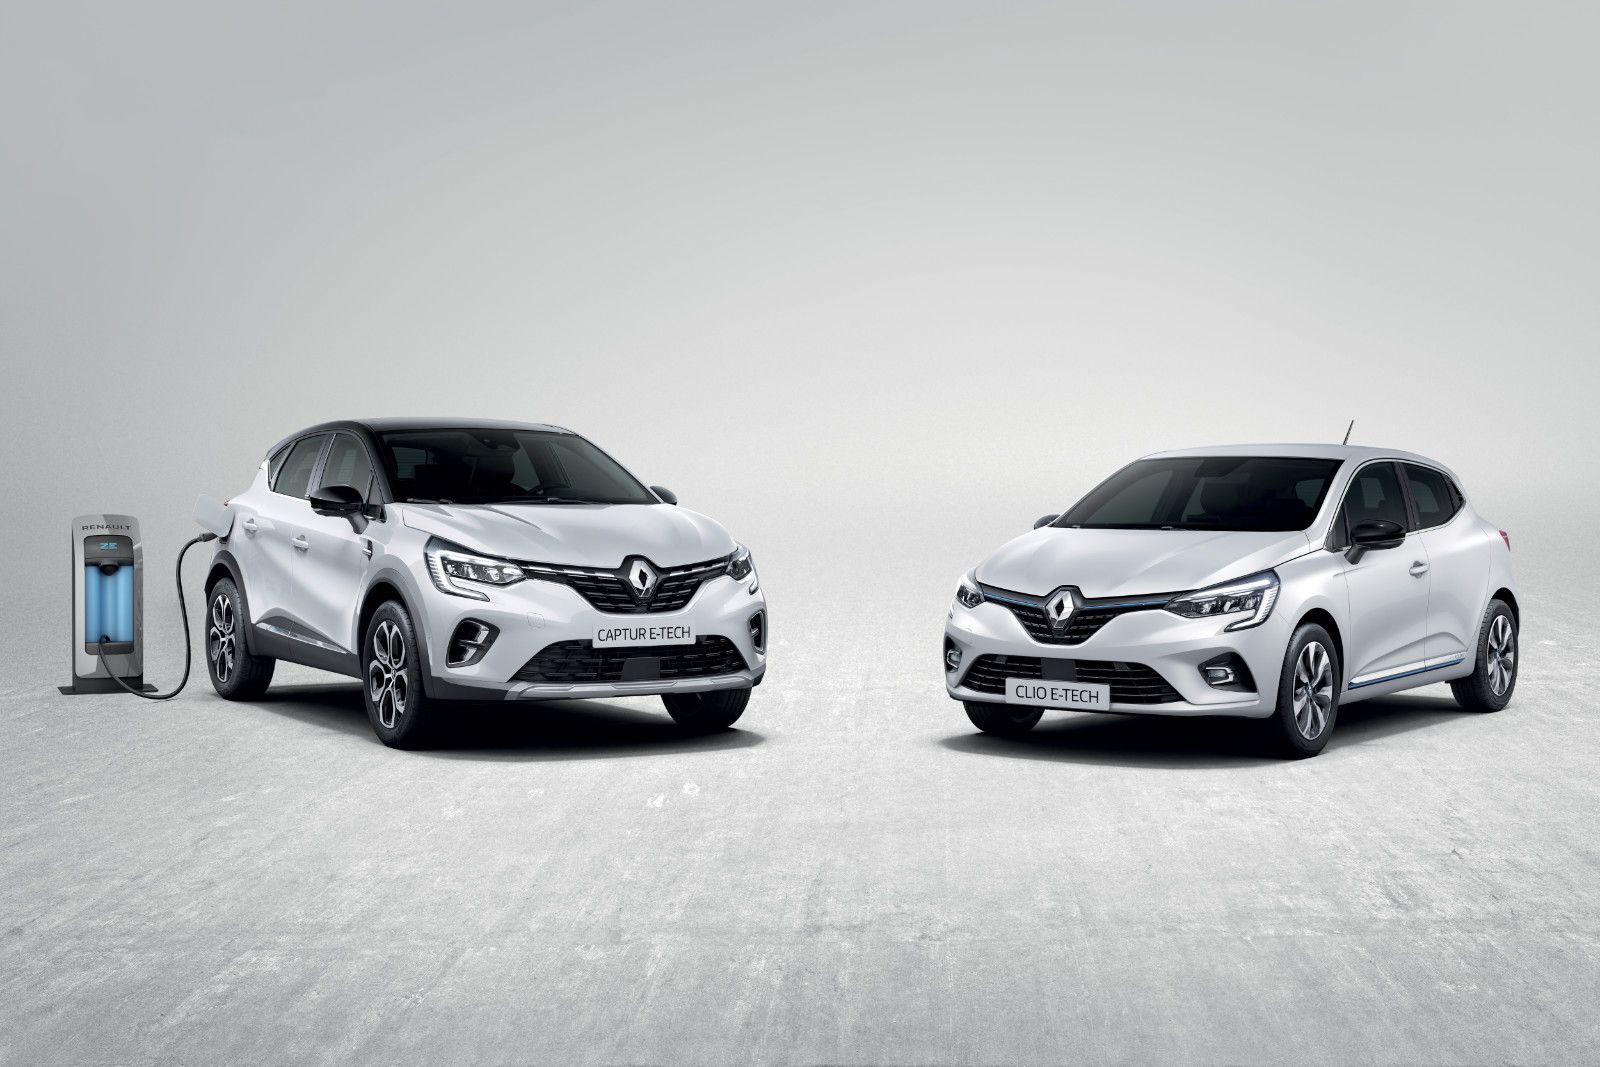 Renault enters hybrid game with Clio E-Tech and plug-in Captur E-Tech image 1